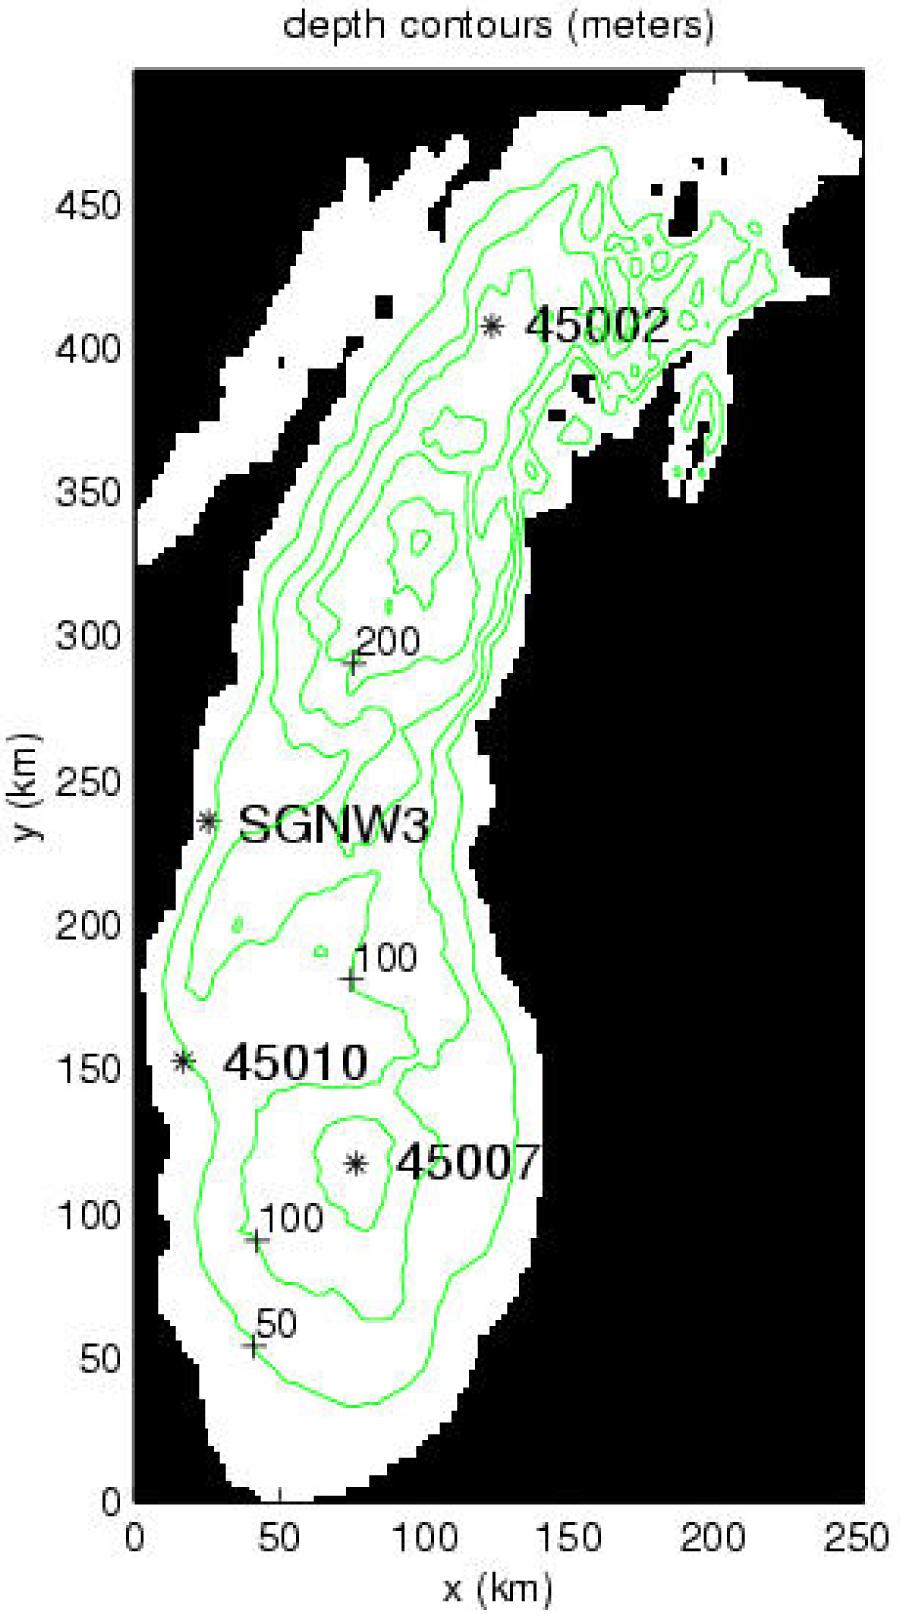 Allard et al. 22 Fig. 17 Bathymetry and data locations for Test 5 Table 10 Bulk Parameters at the Peak of Each Event Buoy 45007 Hm0 (m) 3.7, 5.2 Tp (s) 7.7, 10.0 Tm01 (s) 7.5, 9.